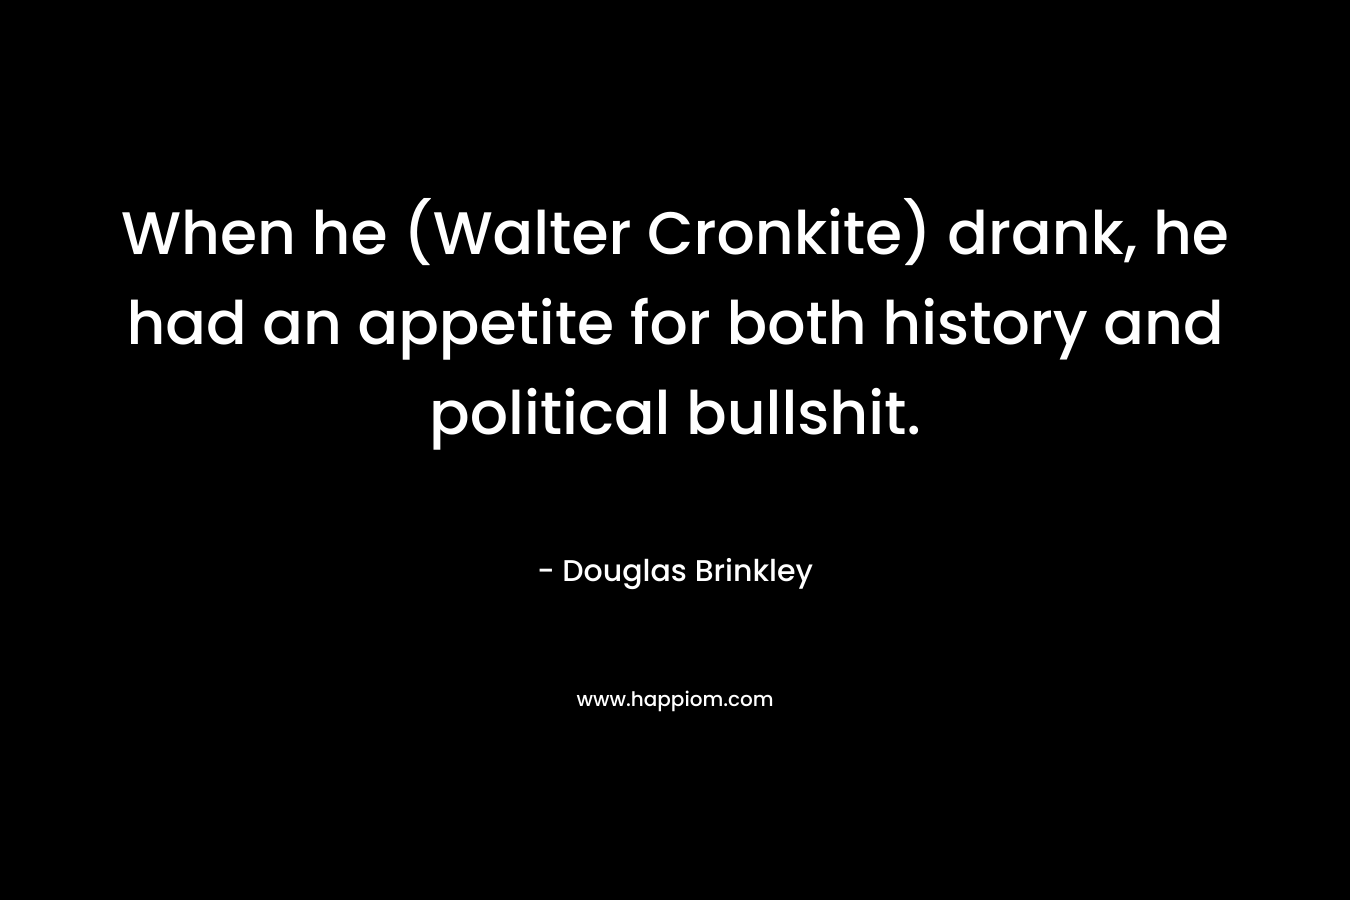 When he (Walter Cronkite) drank, he had an appetite for both history and political bullshit.